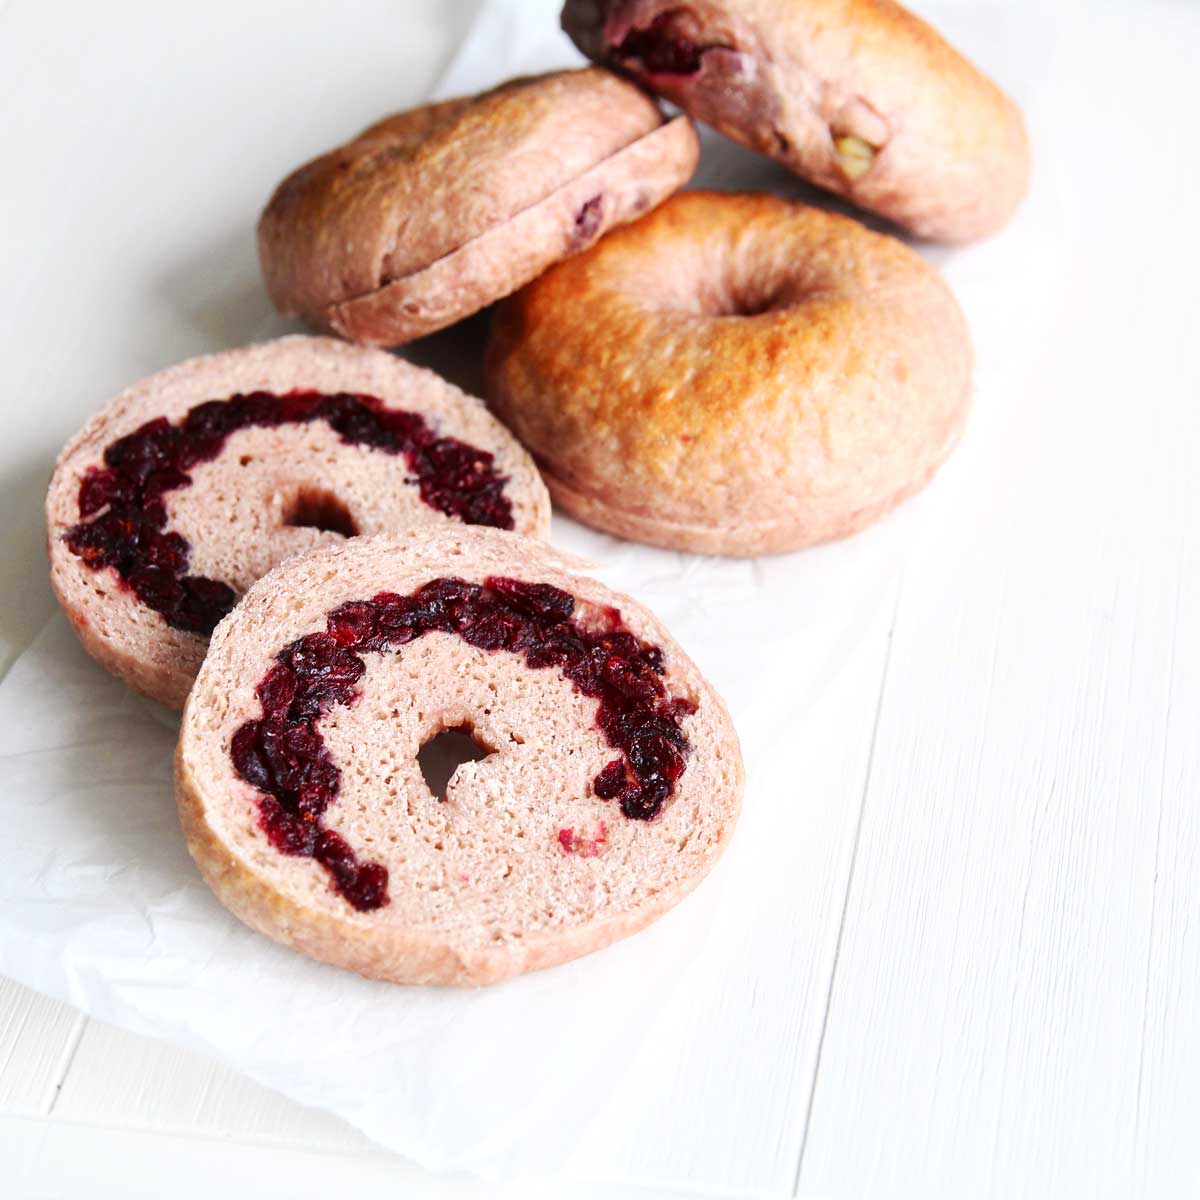 How To Make Stuffed Cranberry Bagels With Canned Cranberry Sauce - Roasted Corn Naan